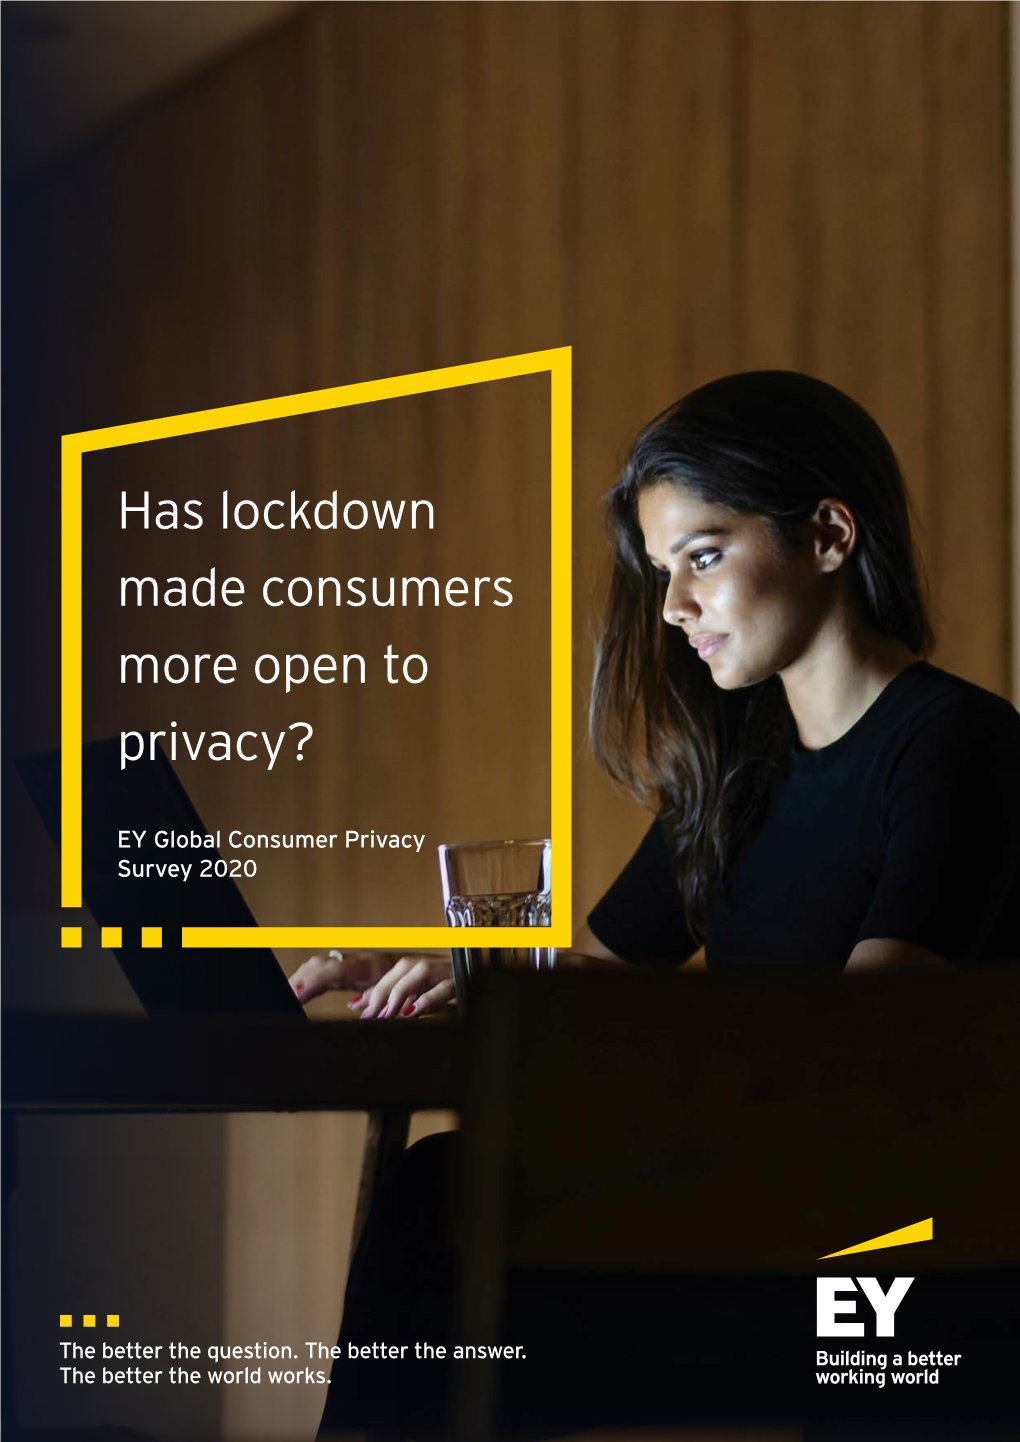 EY Global Consumer Privacy Study 2020